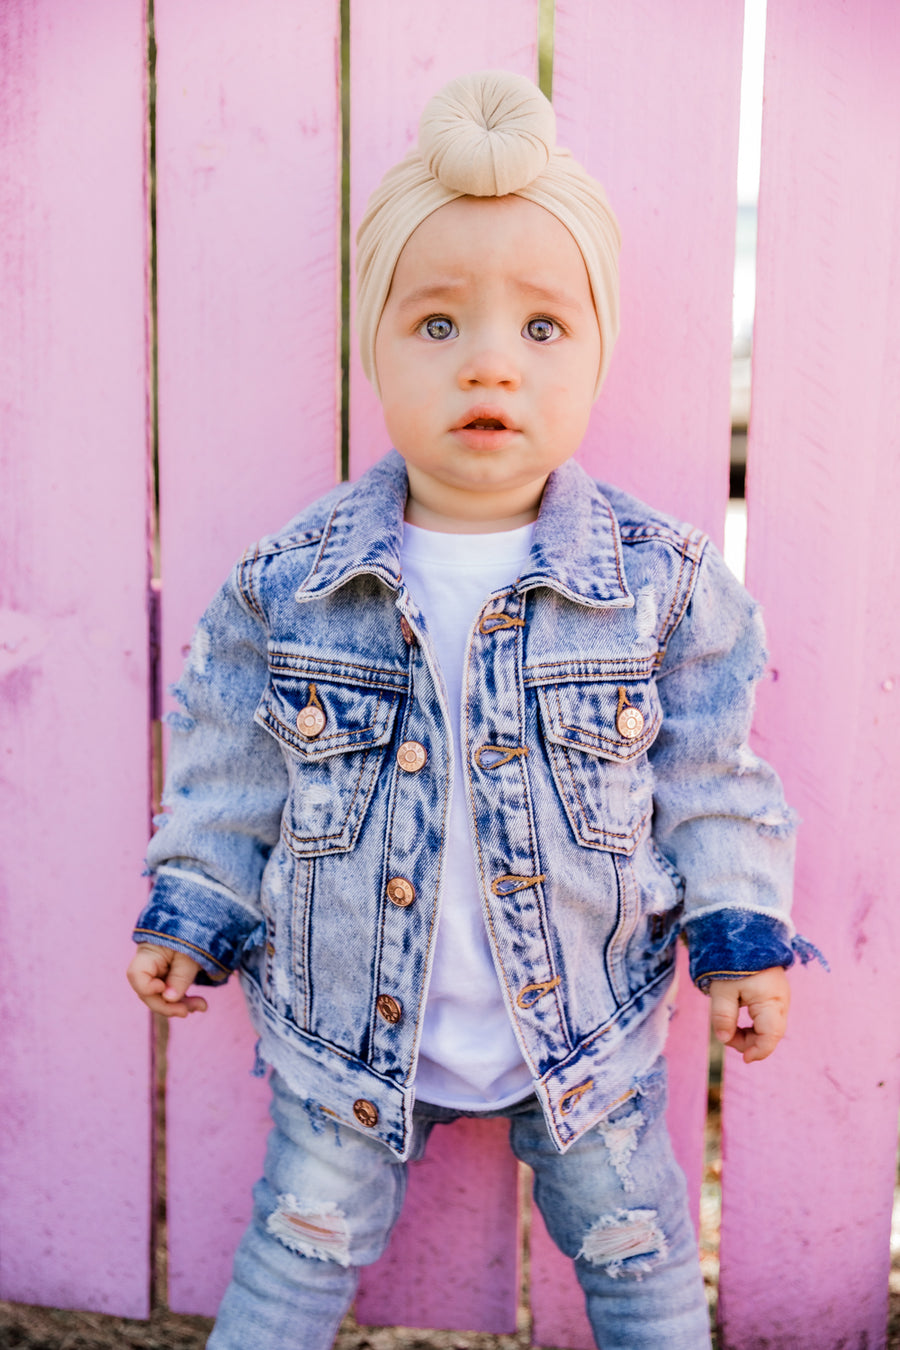 Baby Clothes | Designer Baby Clothes Online | Beau Hudson